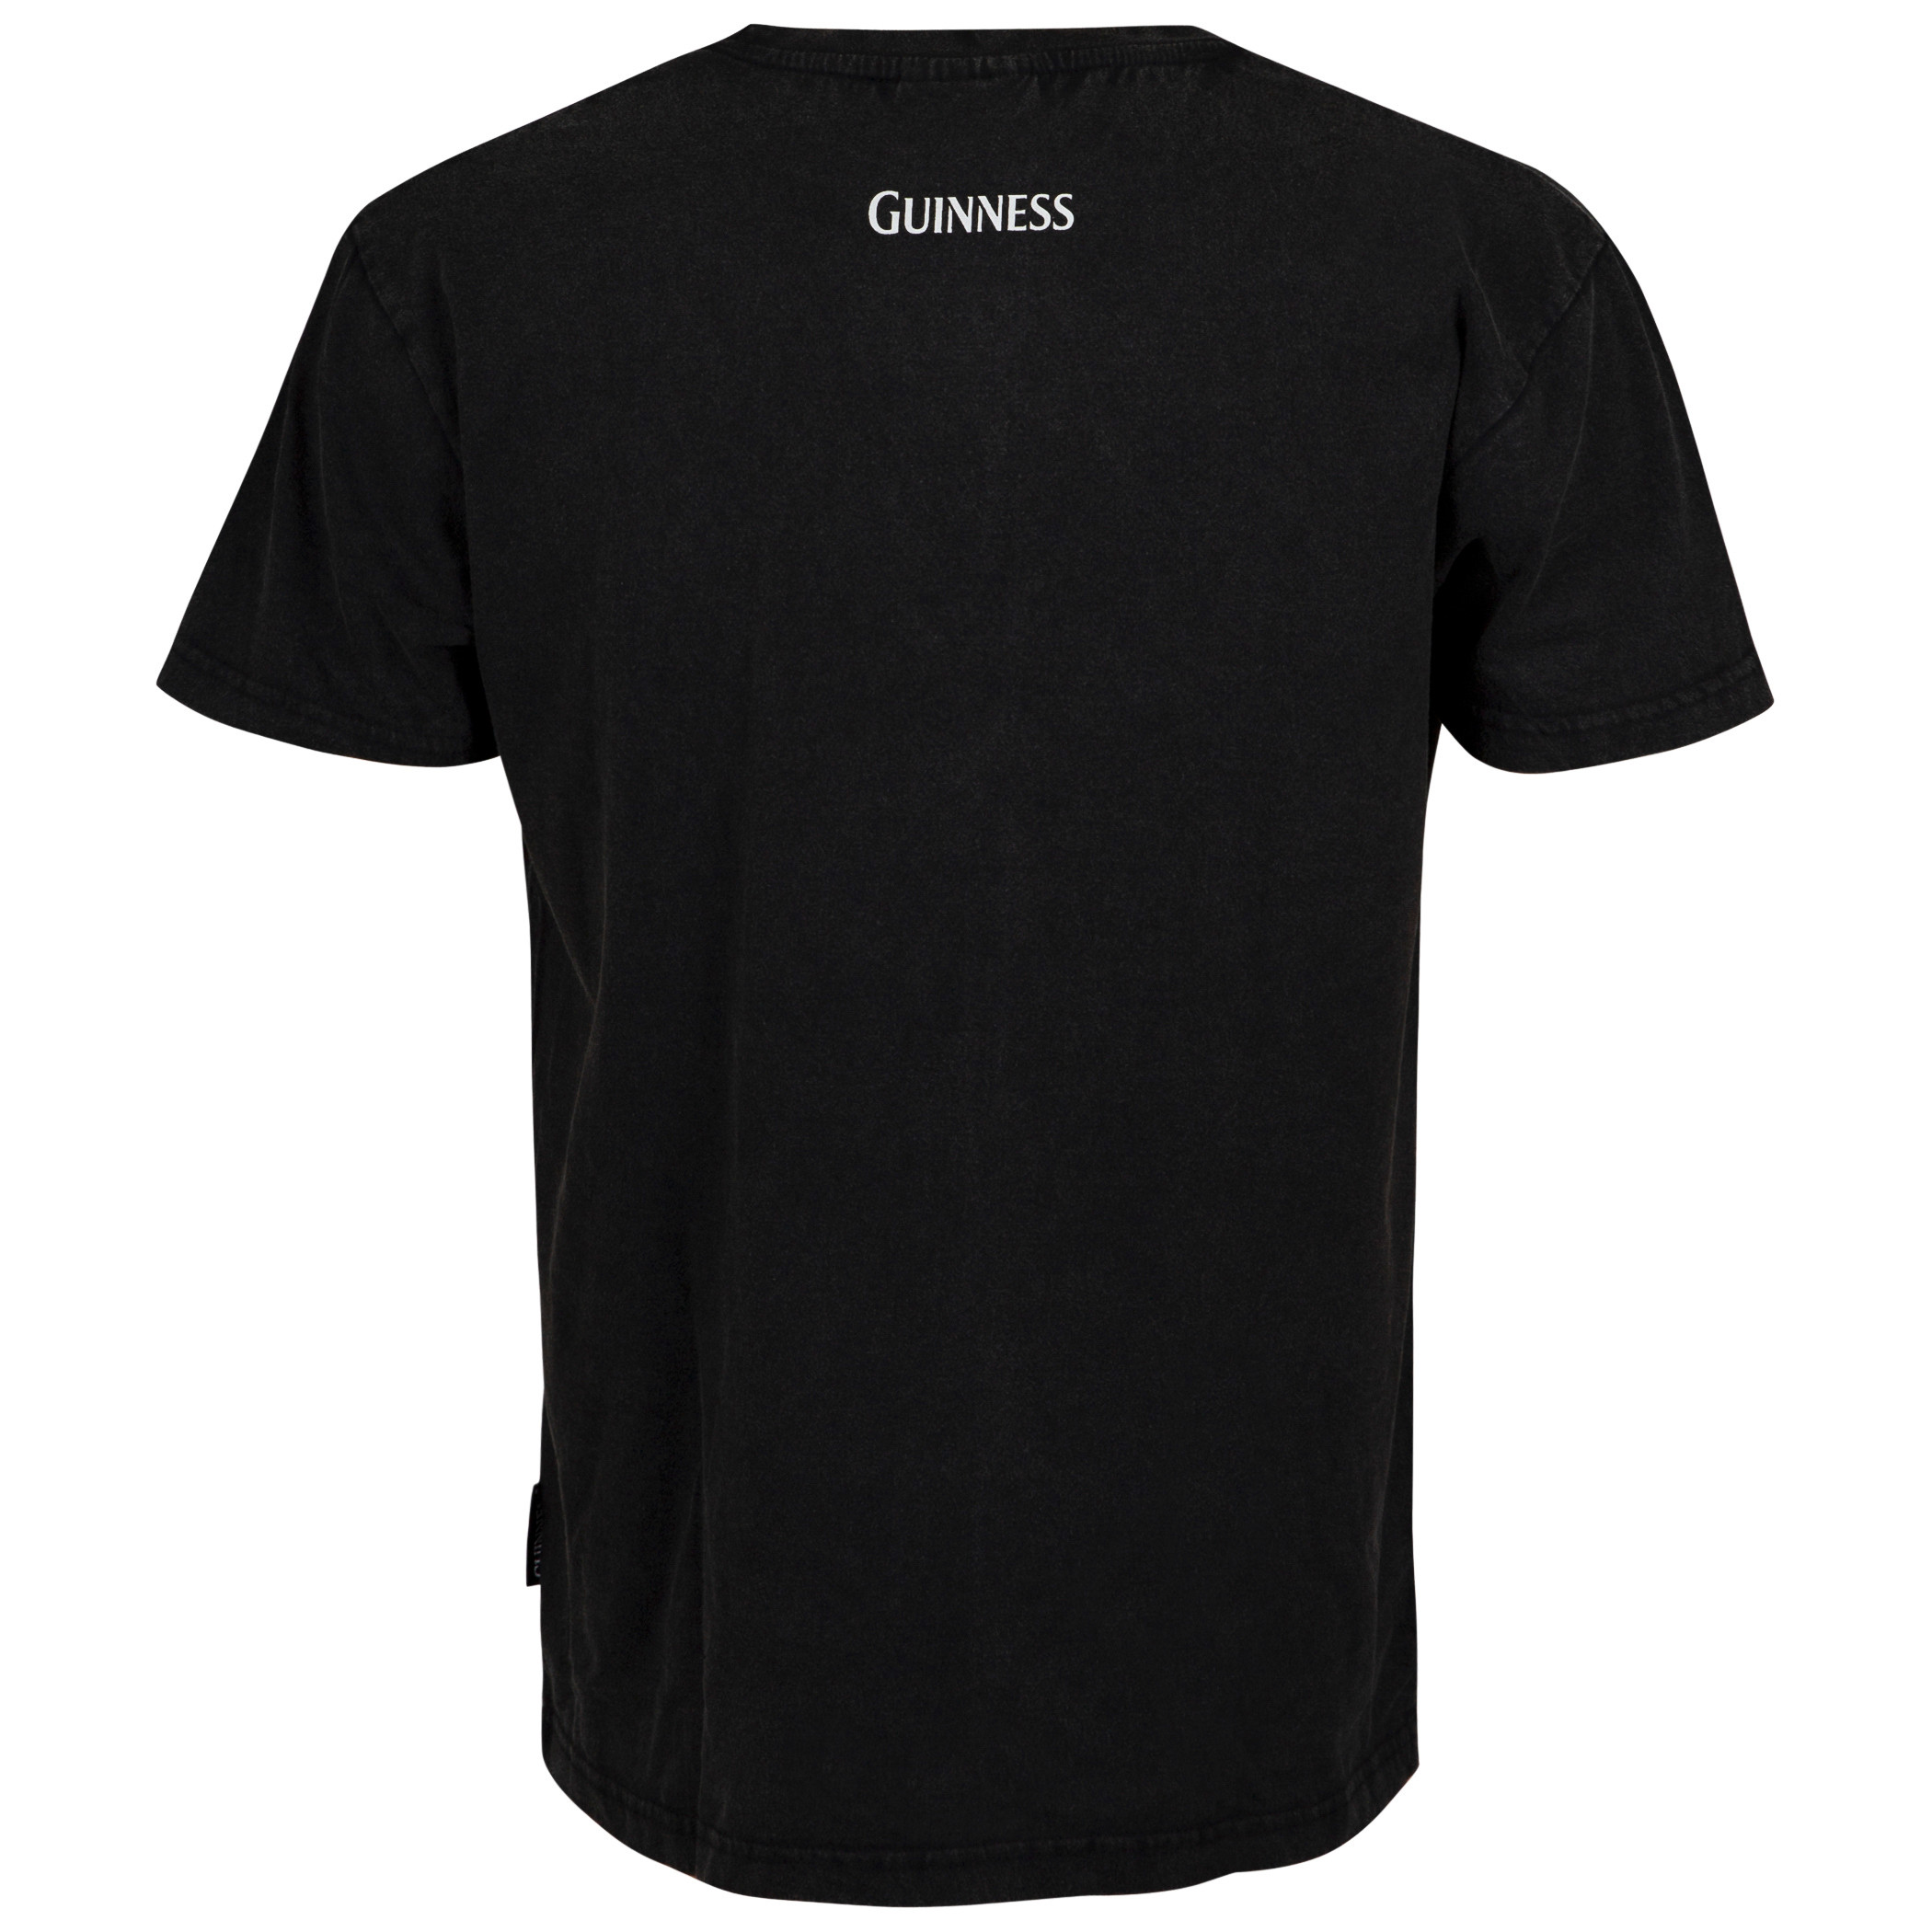 Guinness Are You Toucan To Me Black Tee Shirt